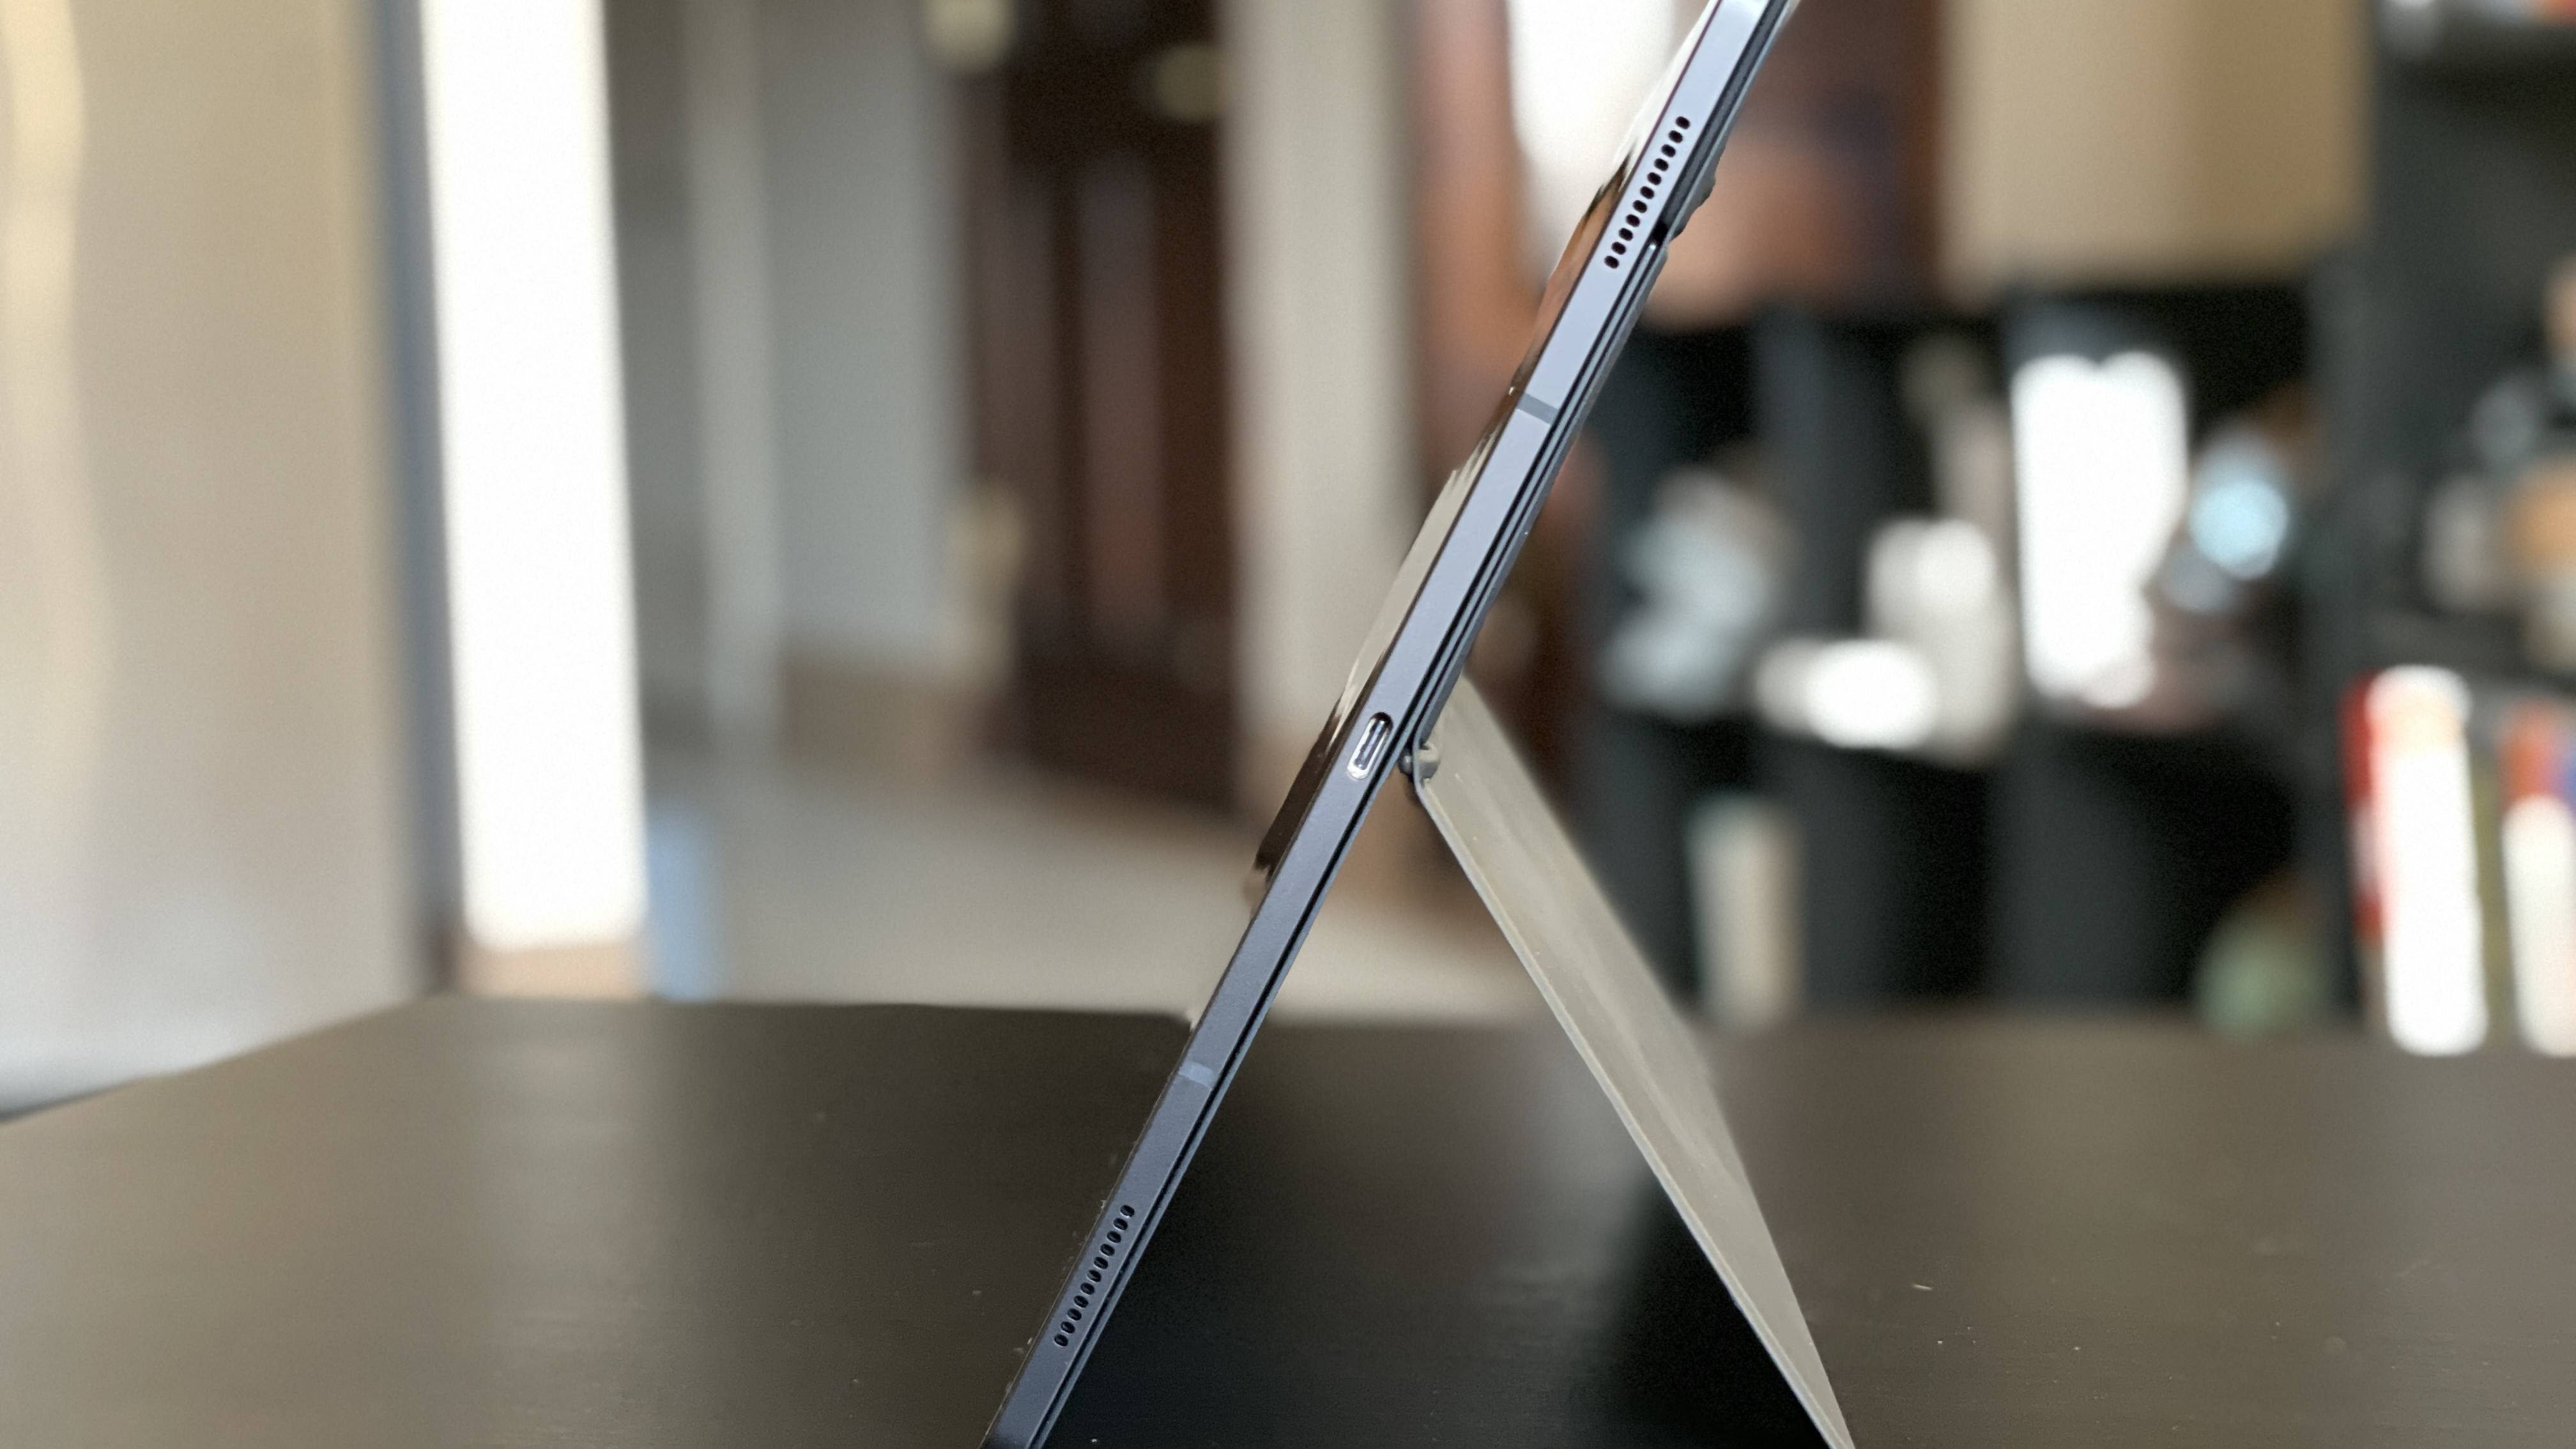 Galaxy Tab S8 Ultra review: Big, beautiful and probably not for